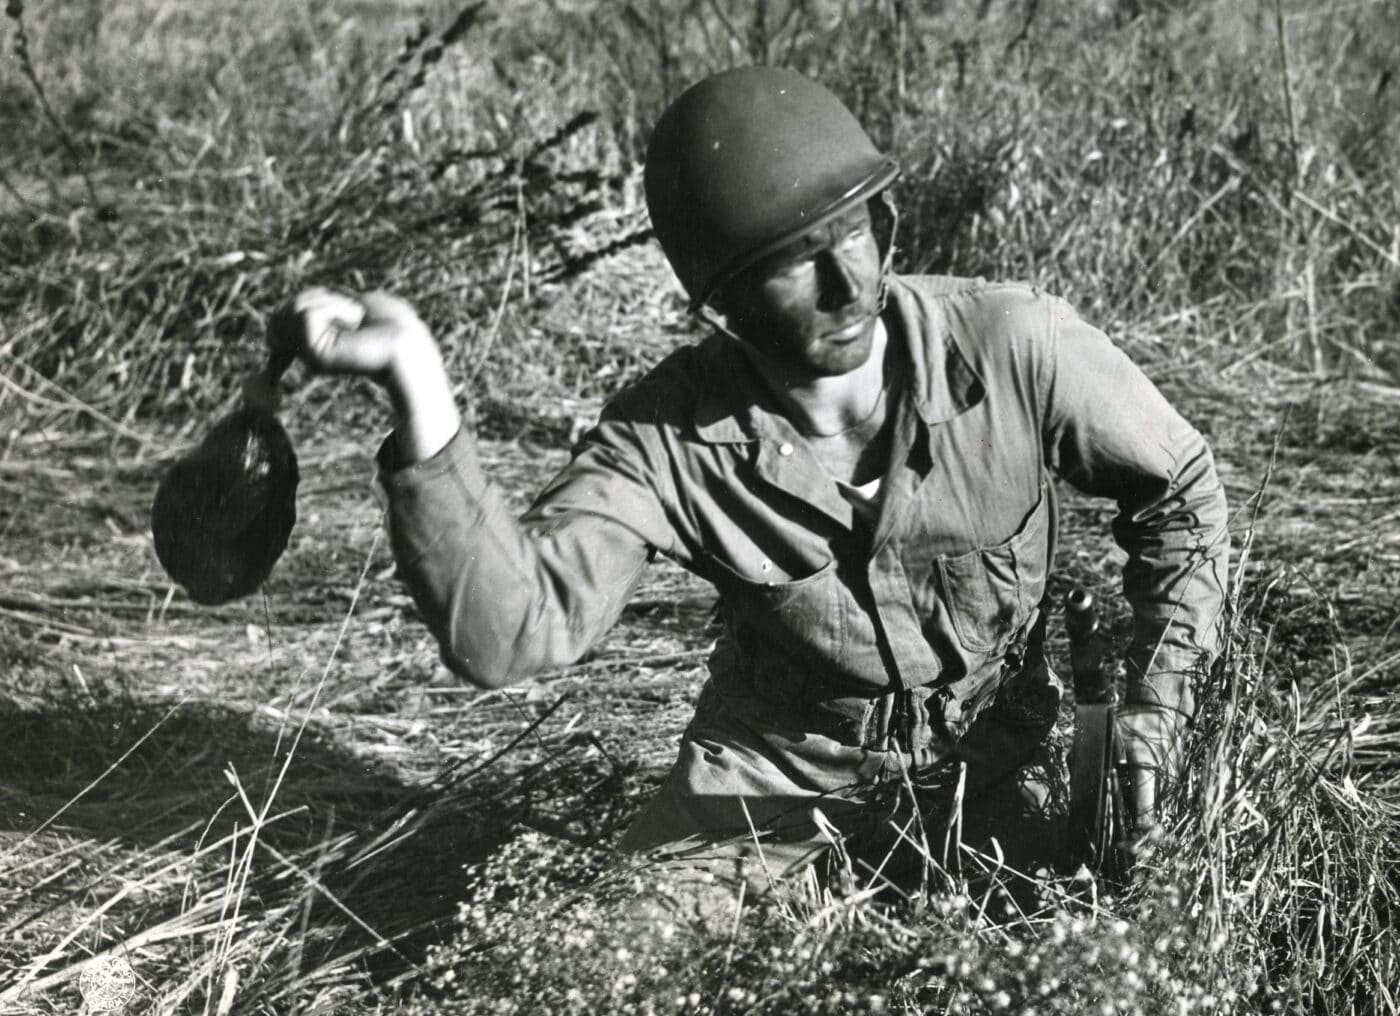 U.S. tank destroyer crewman training with a “sticky bomb” anti-tank grenade during 1943